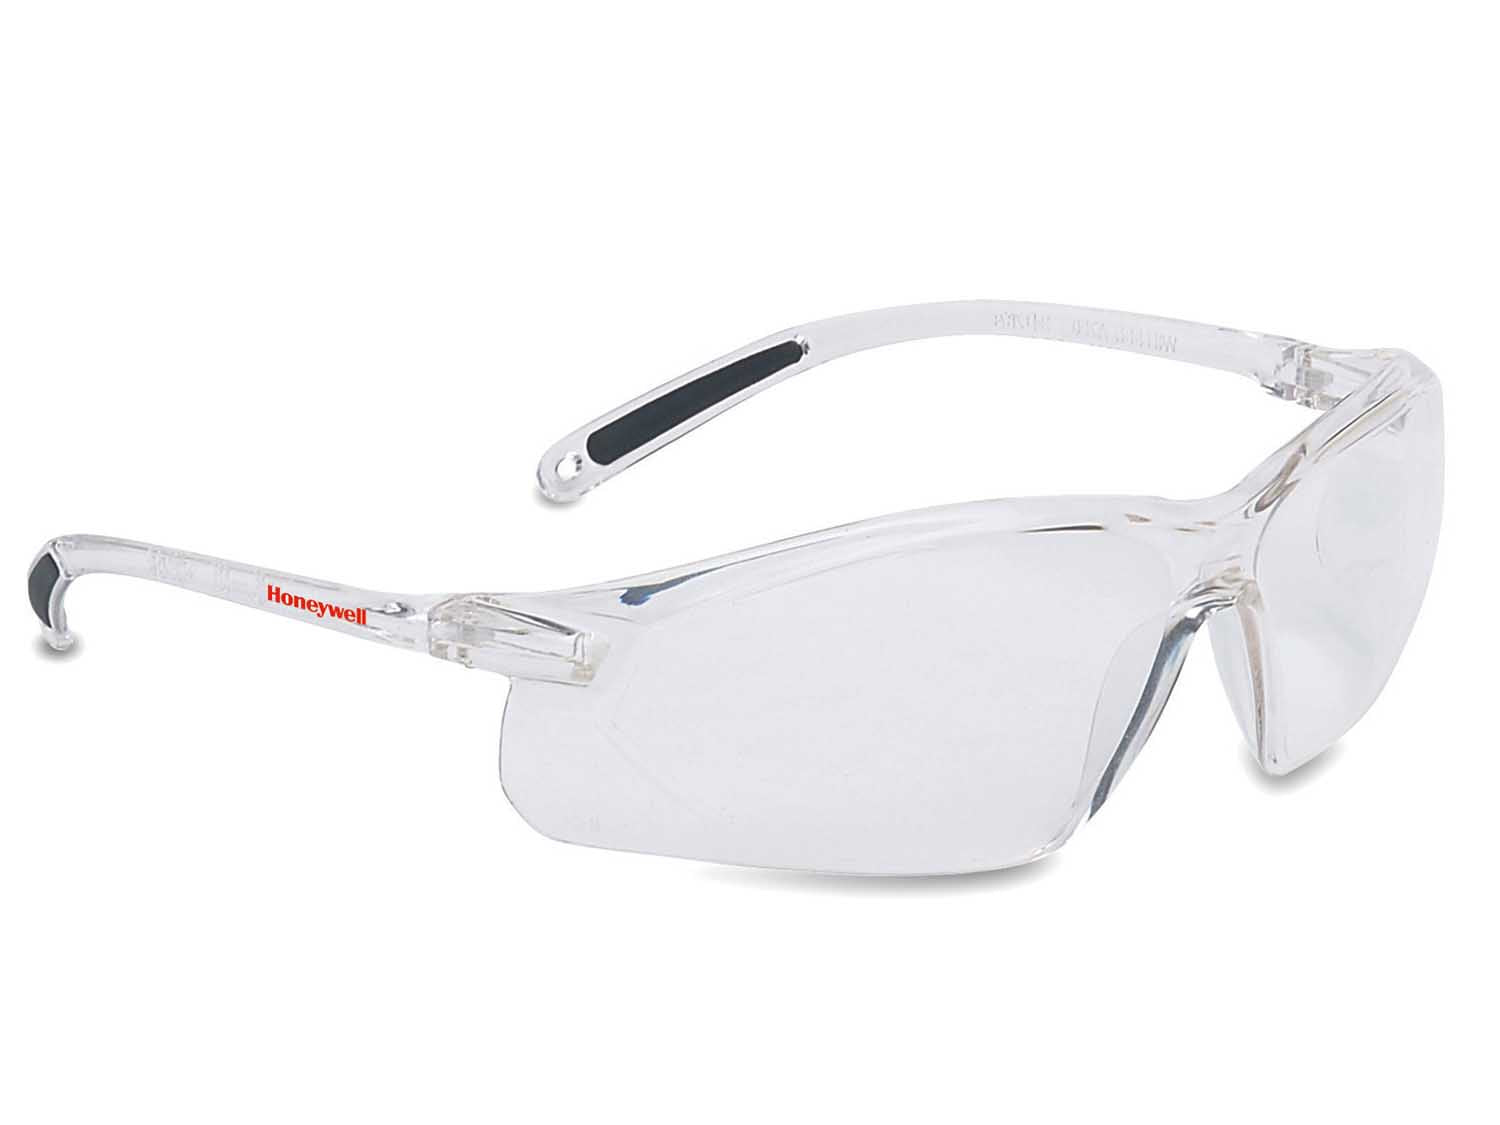 Honeywell A700 Safety Glasses Clear Lens Anti-scratch